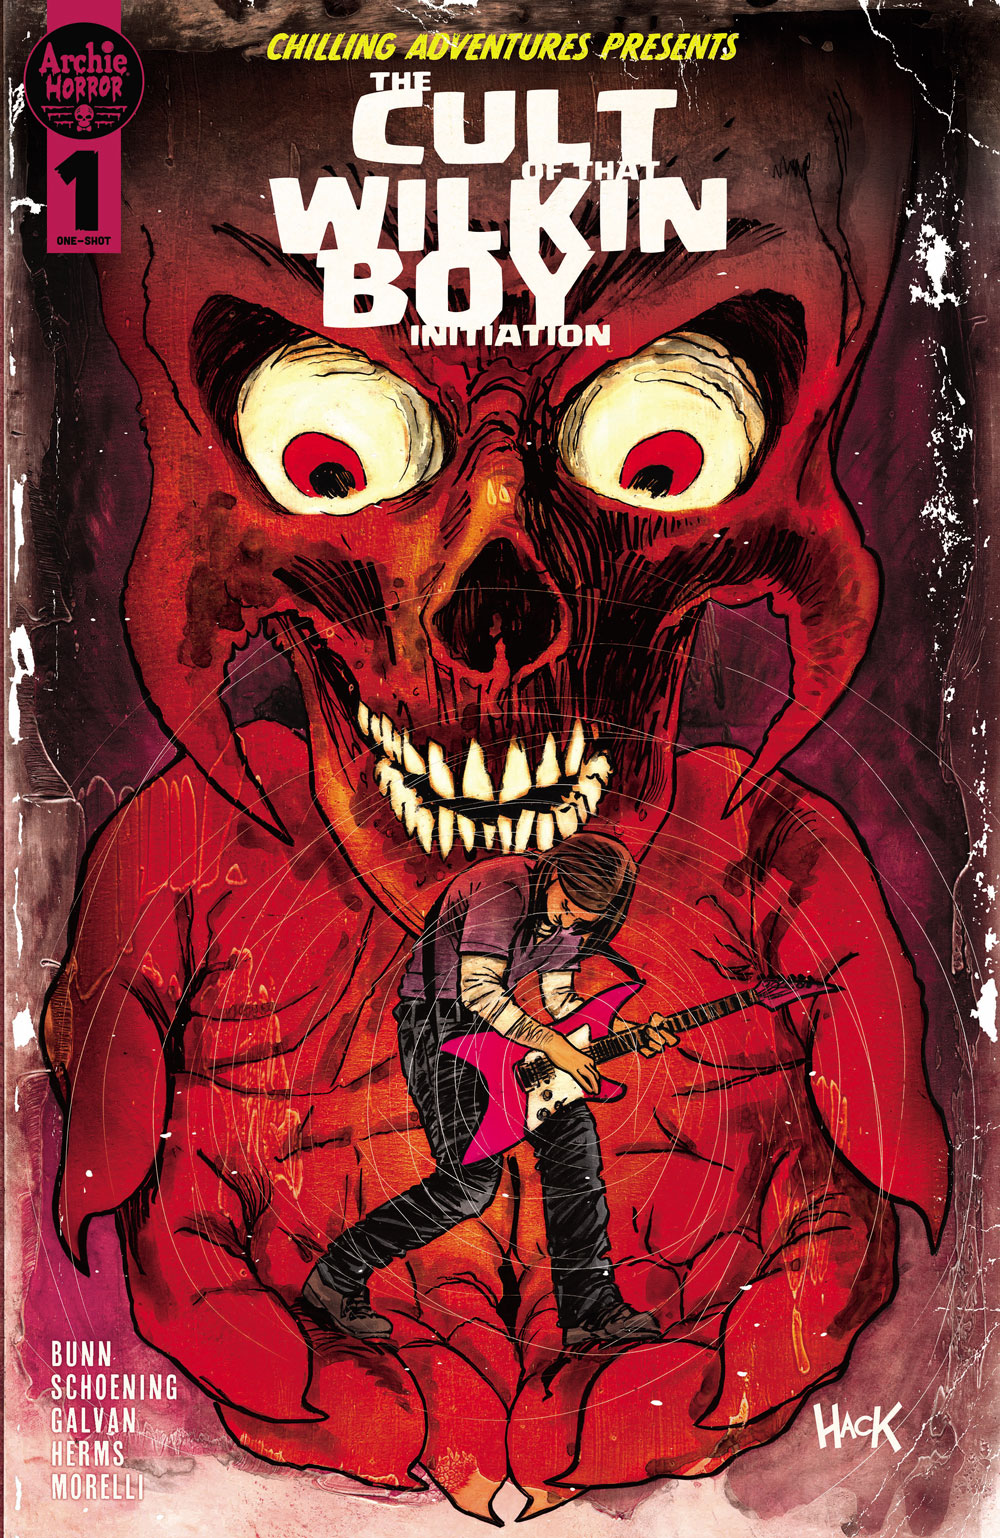 The variant cover of The Cult of That Wilkin Boy: Initiation #1